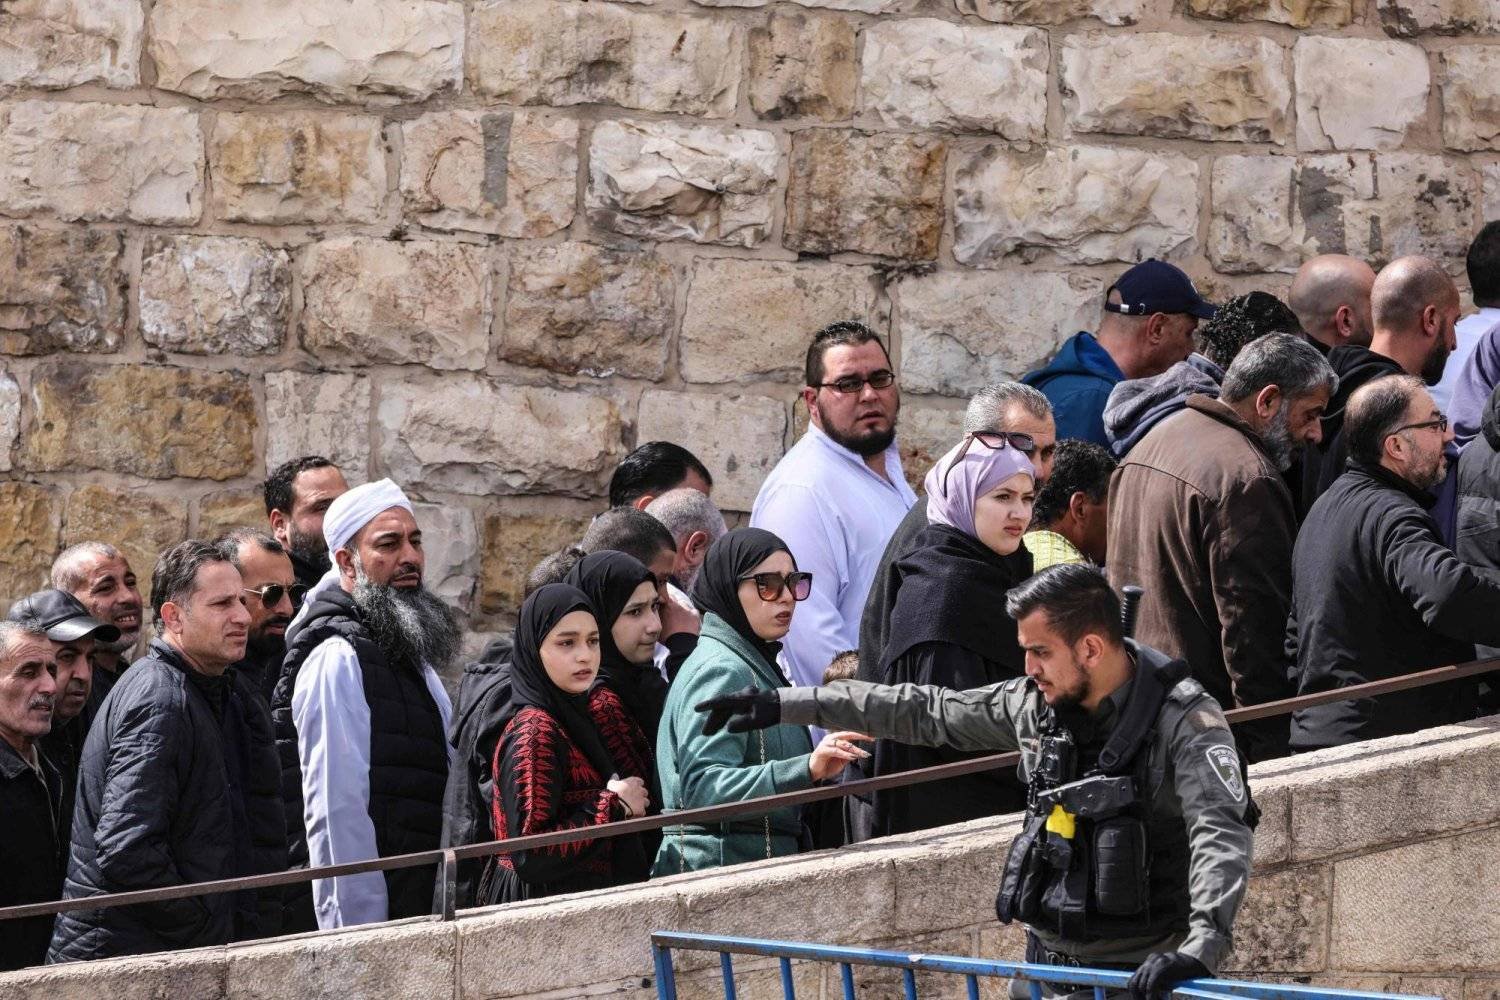 An Israeli security officer stands guard as Muslim worshipers pass through a checkpoint near the Asbat Gate in Jerusalem to enter the Al-Aqsa Mosque compound for Friday prayers 